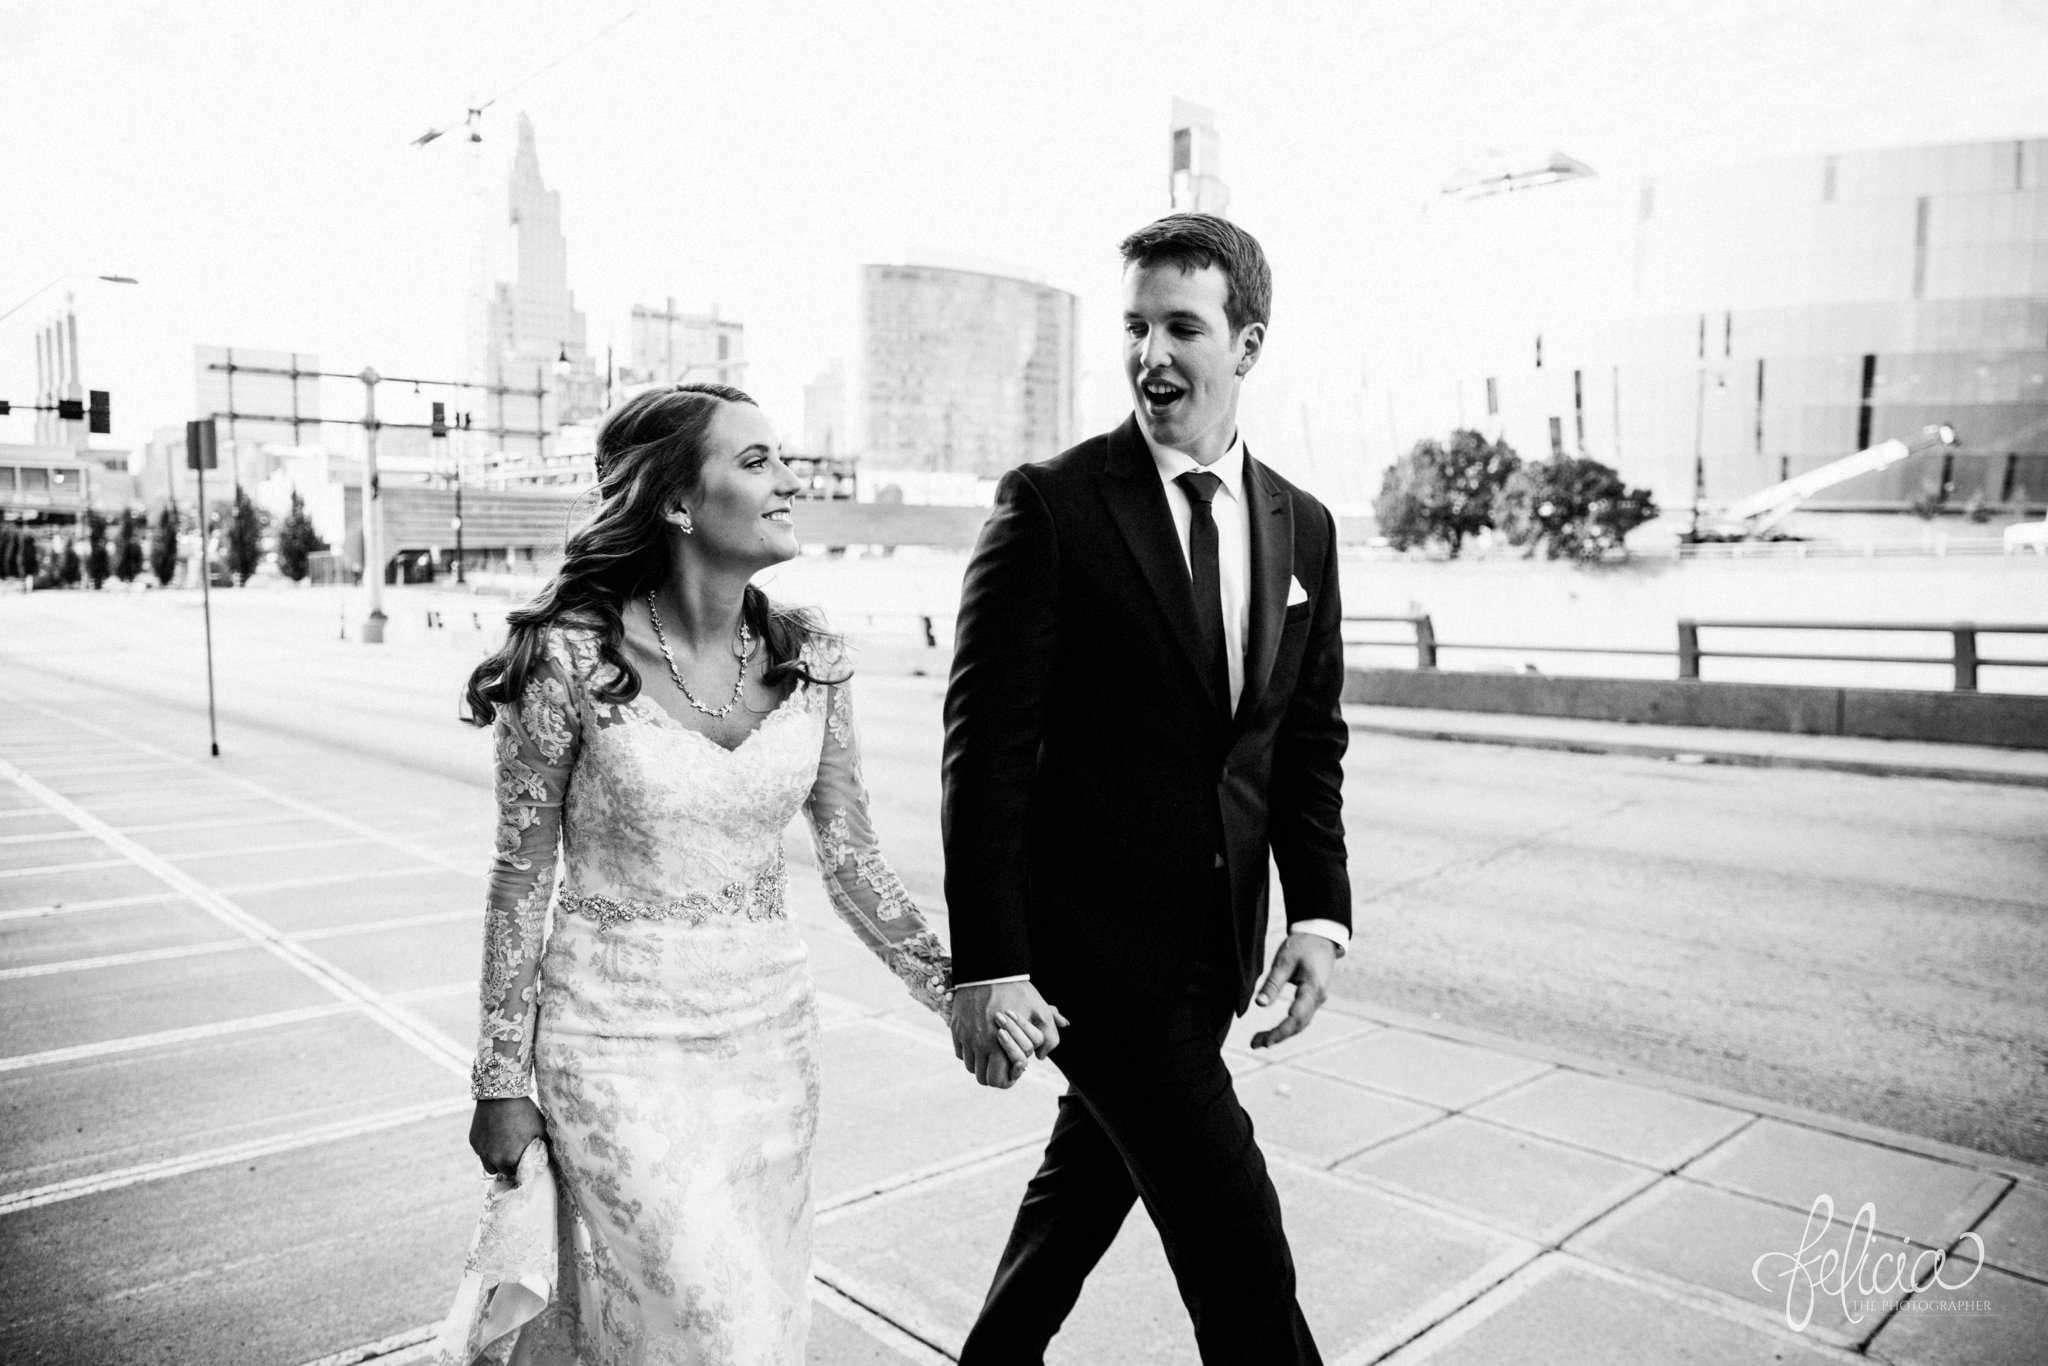 black and white | weddings | wedding photos | wedding photography | images by feliciathephotographer.com | St. Therese Catholic Church | Kansas City | downtown | The Terrace on Grand | bridal party portraits | urban jungle | downtown skyline | candid | holding hands | street photography | crosswalk 